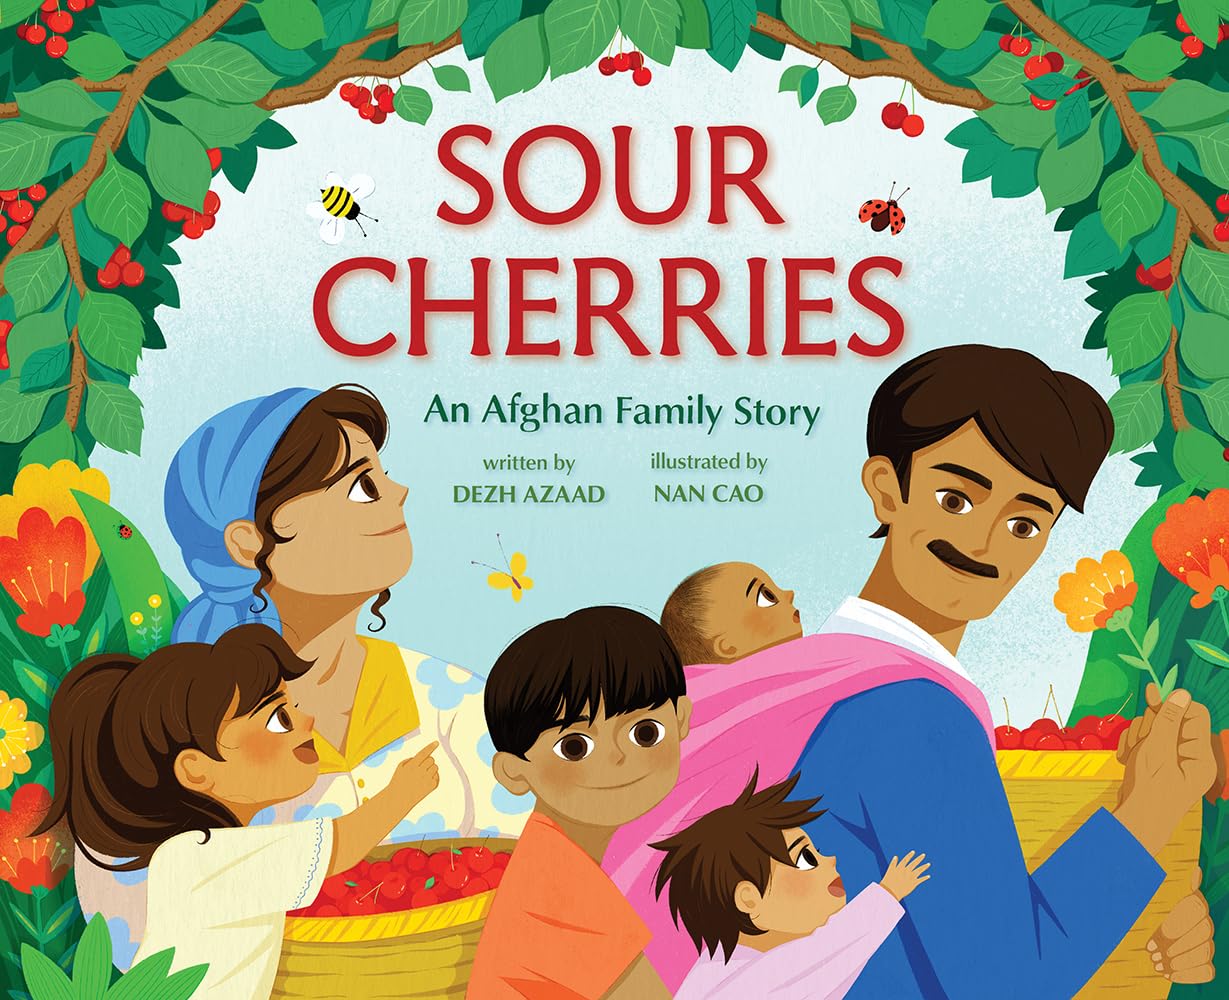 Sour Cherries: An Afghan Family Story (Dezh Azaad, Nan Cao)